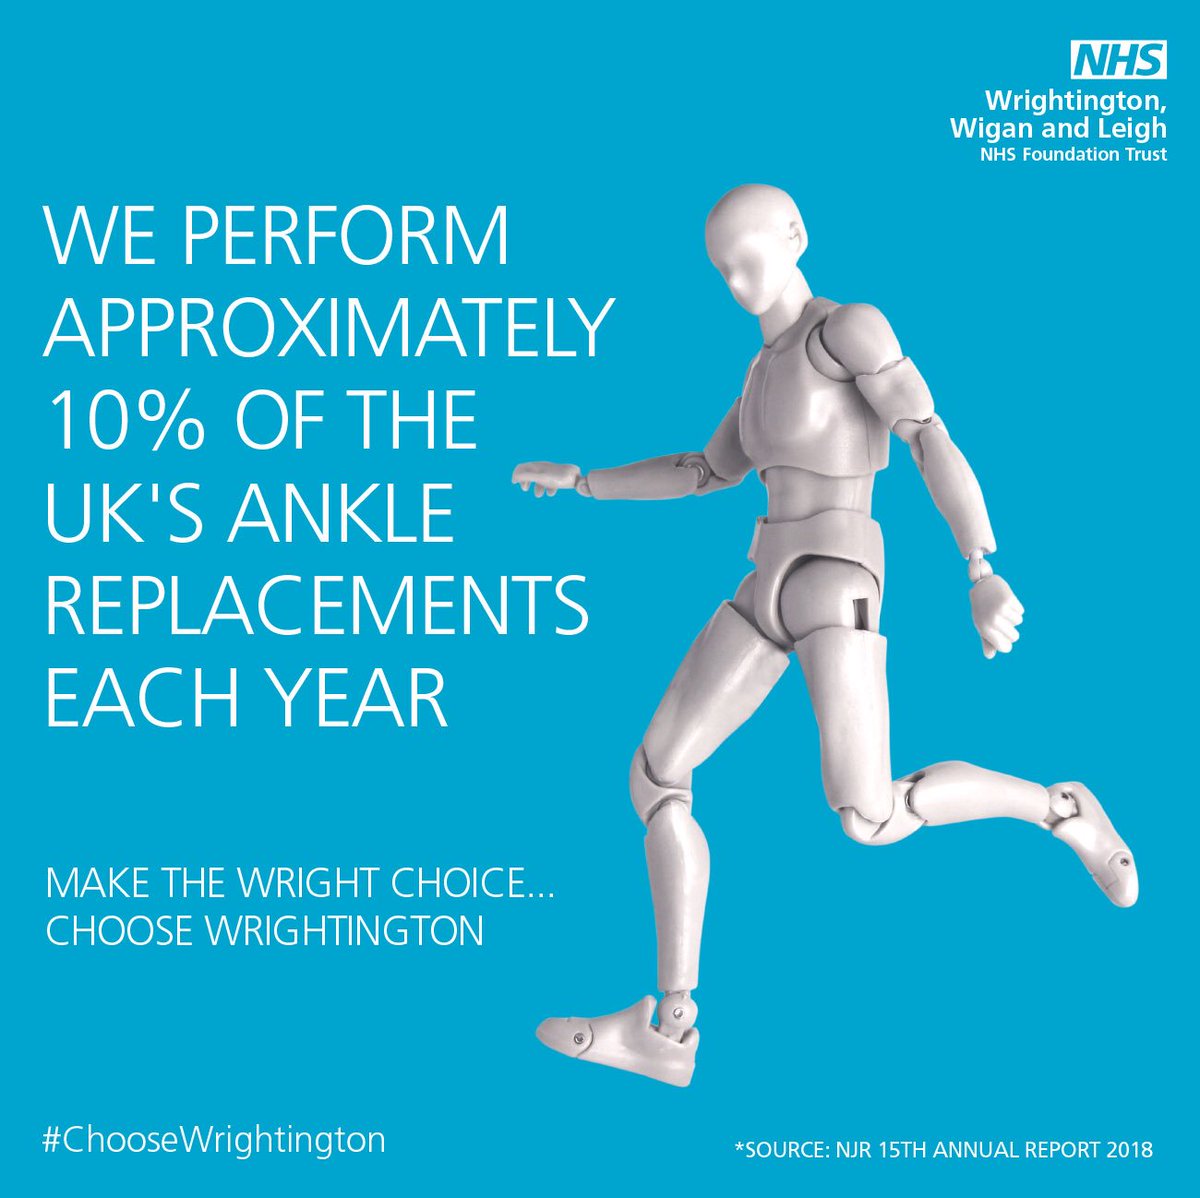 Do you need an #anklereplacement & wondering where to have it? You’re in safe hands with us! #ChooseWrightington #CentreofExcellence #ankleinjury #anklesurgery